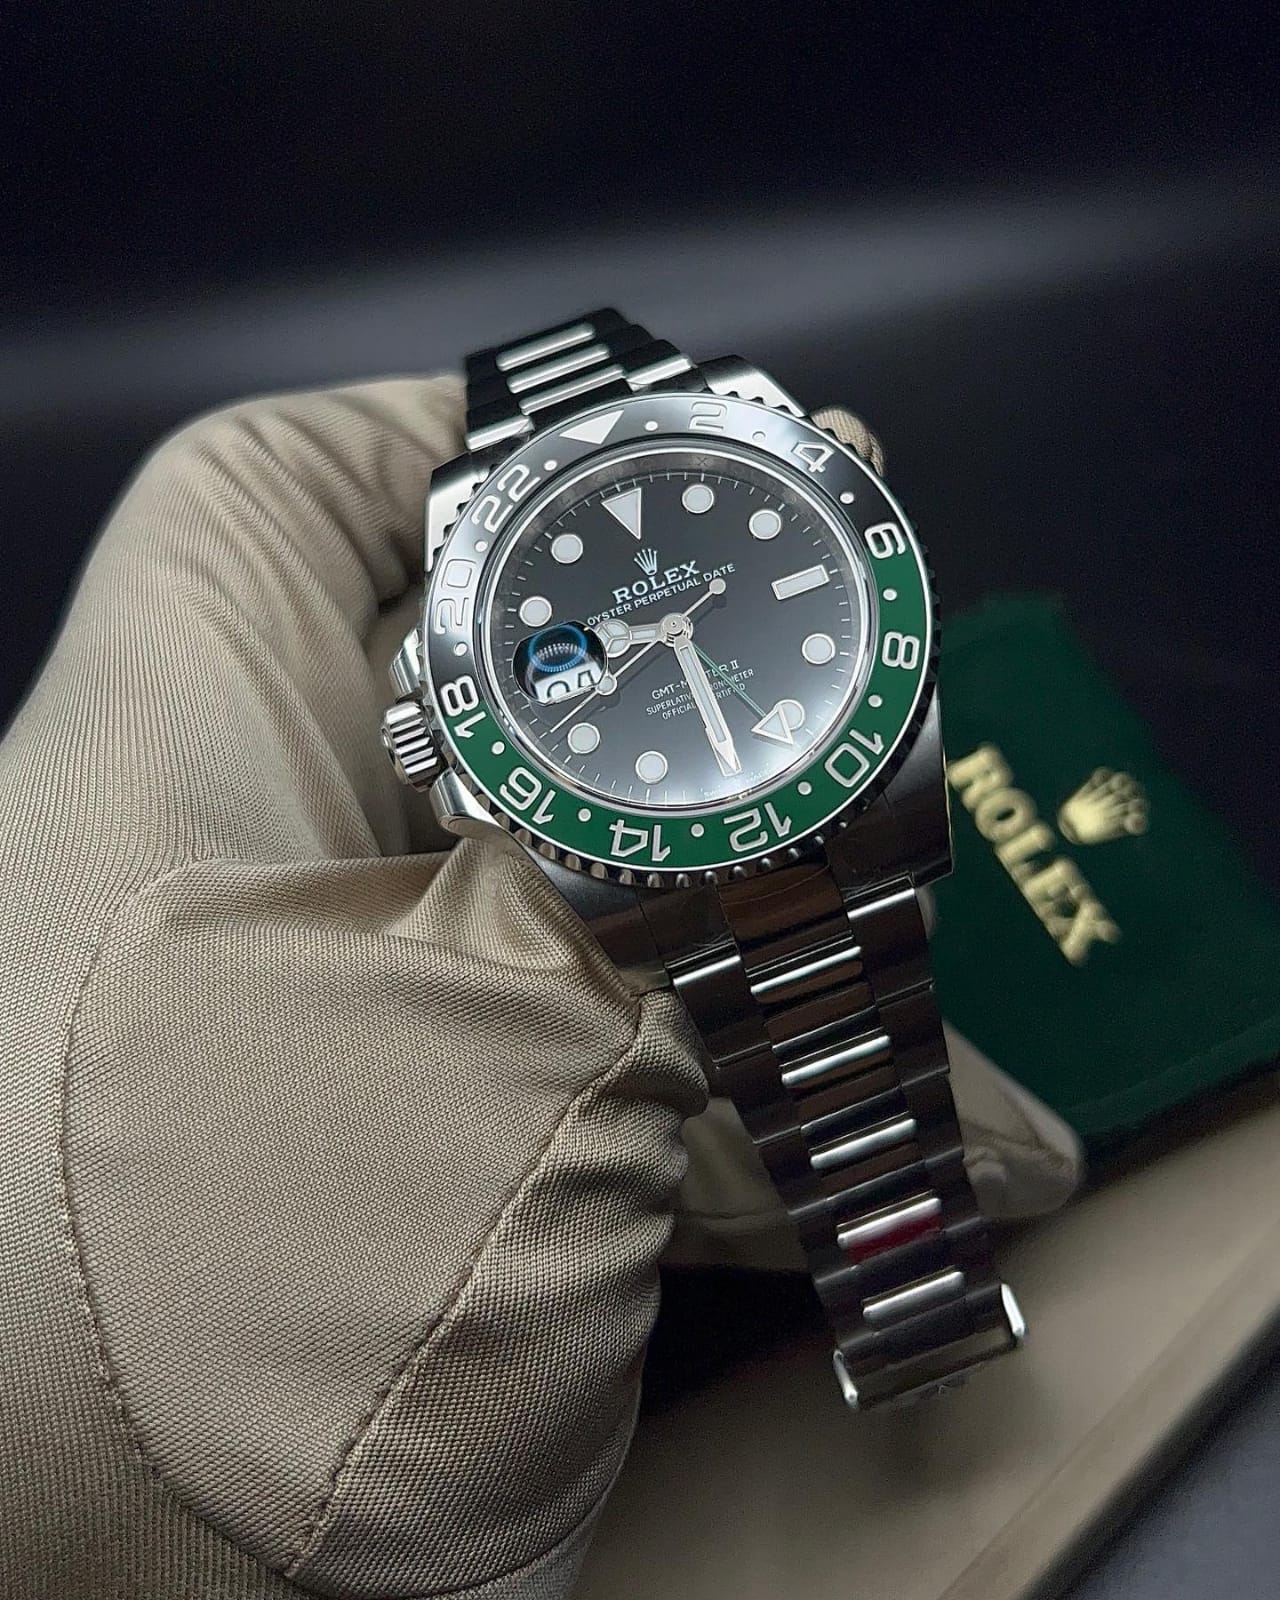 What is the Rolex Sprite and why is it so unique? – lbjwatches